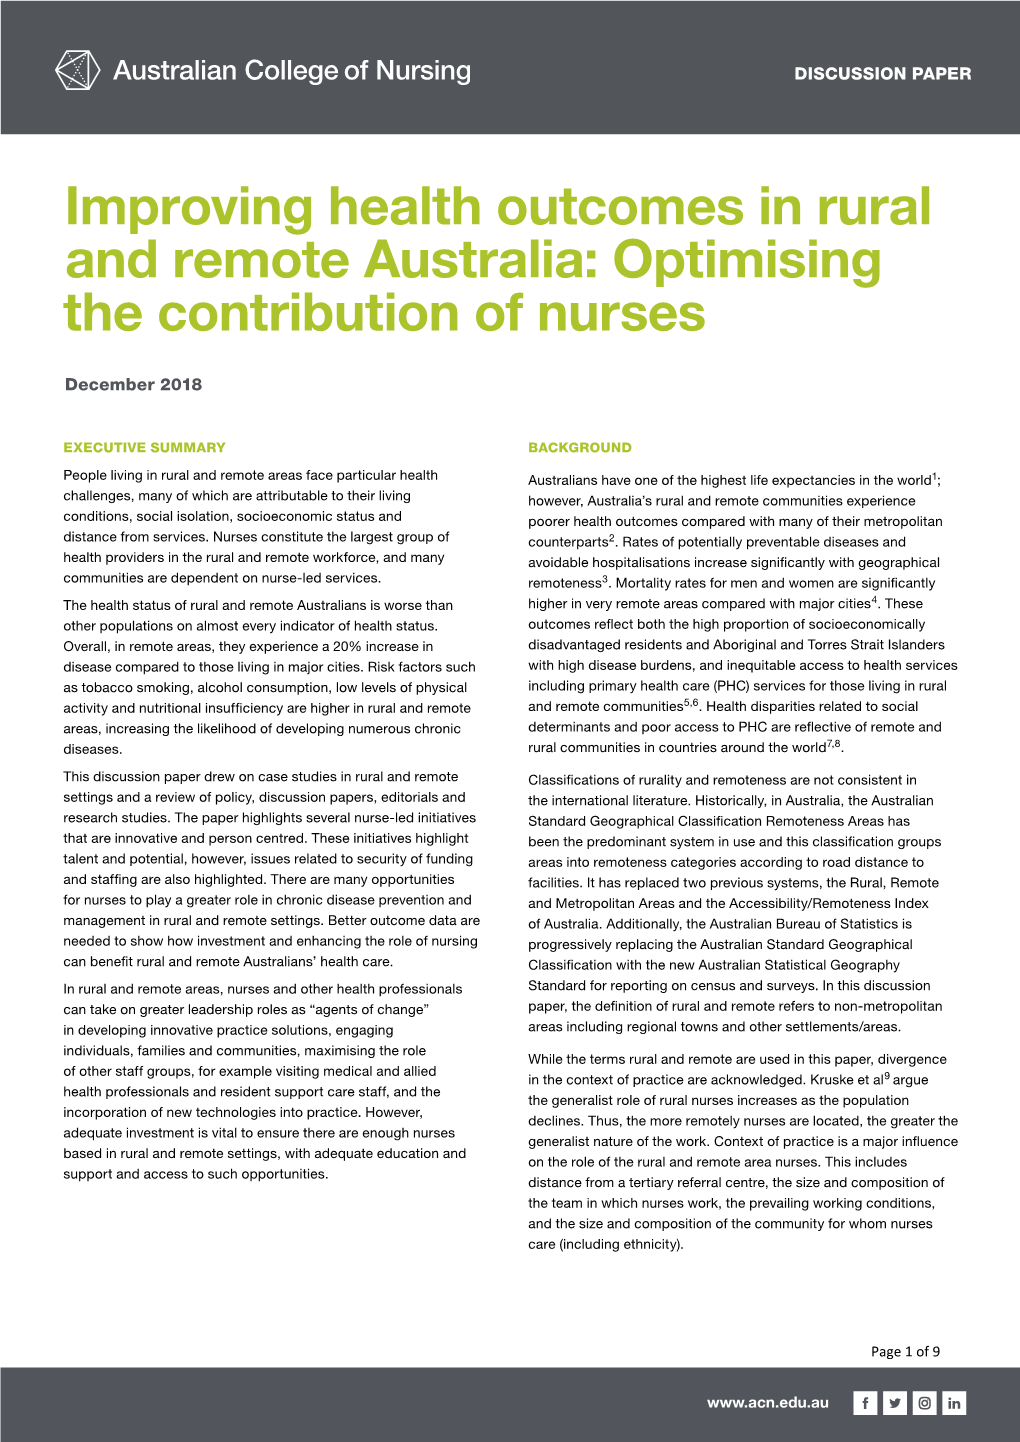 Improving Health Outcomes in Rural and Remote Australia: Optimising the Contributiondiscussion of Papernurses